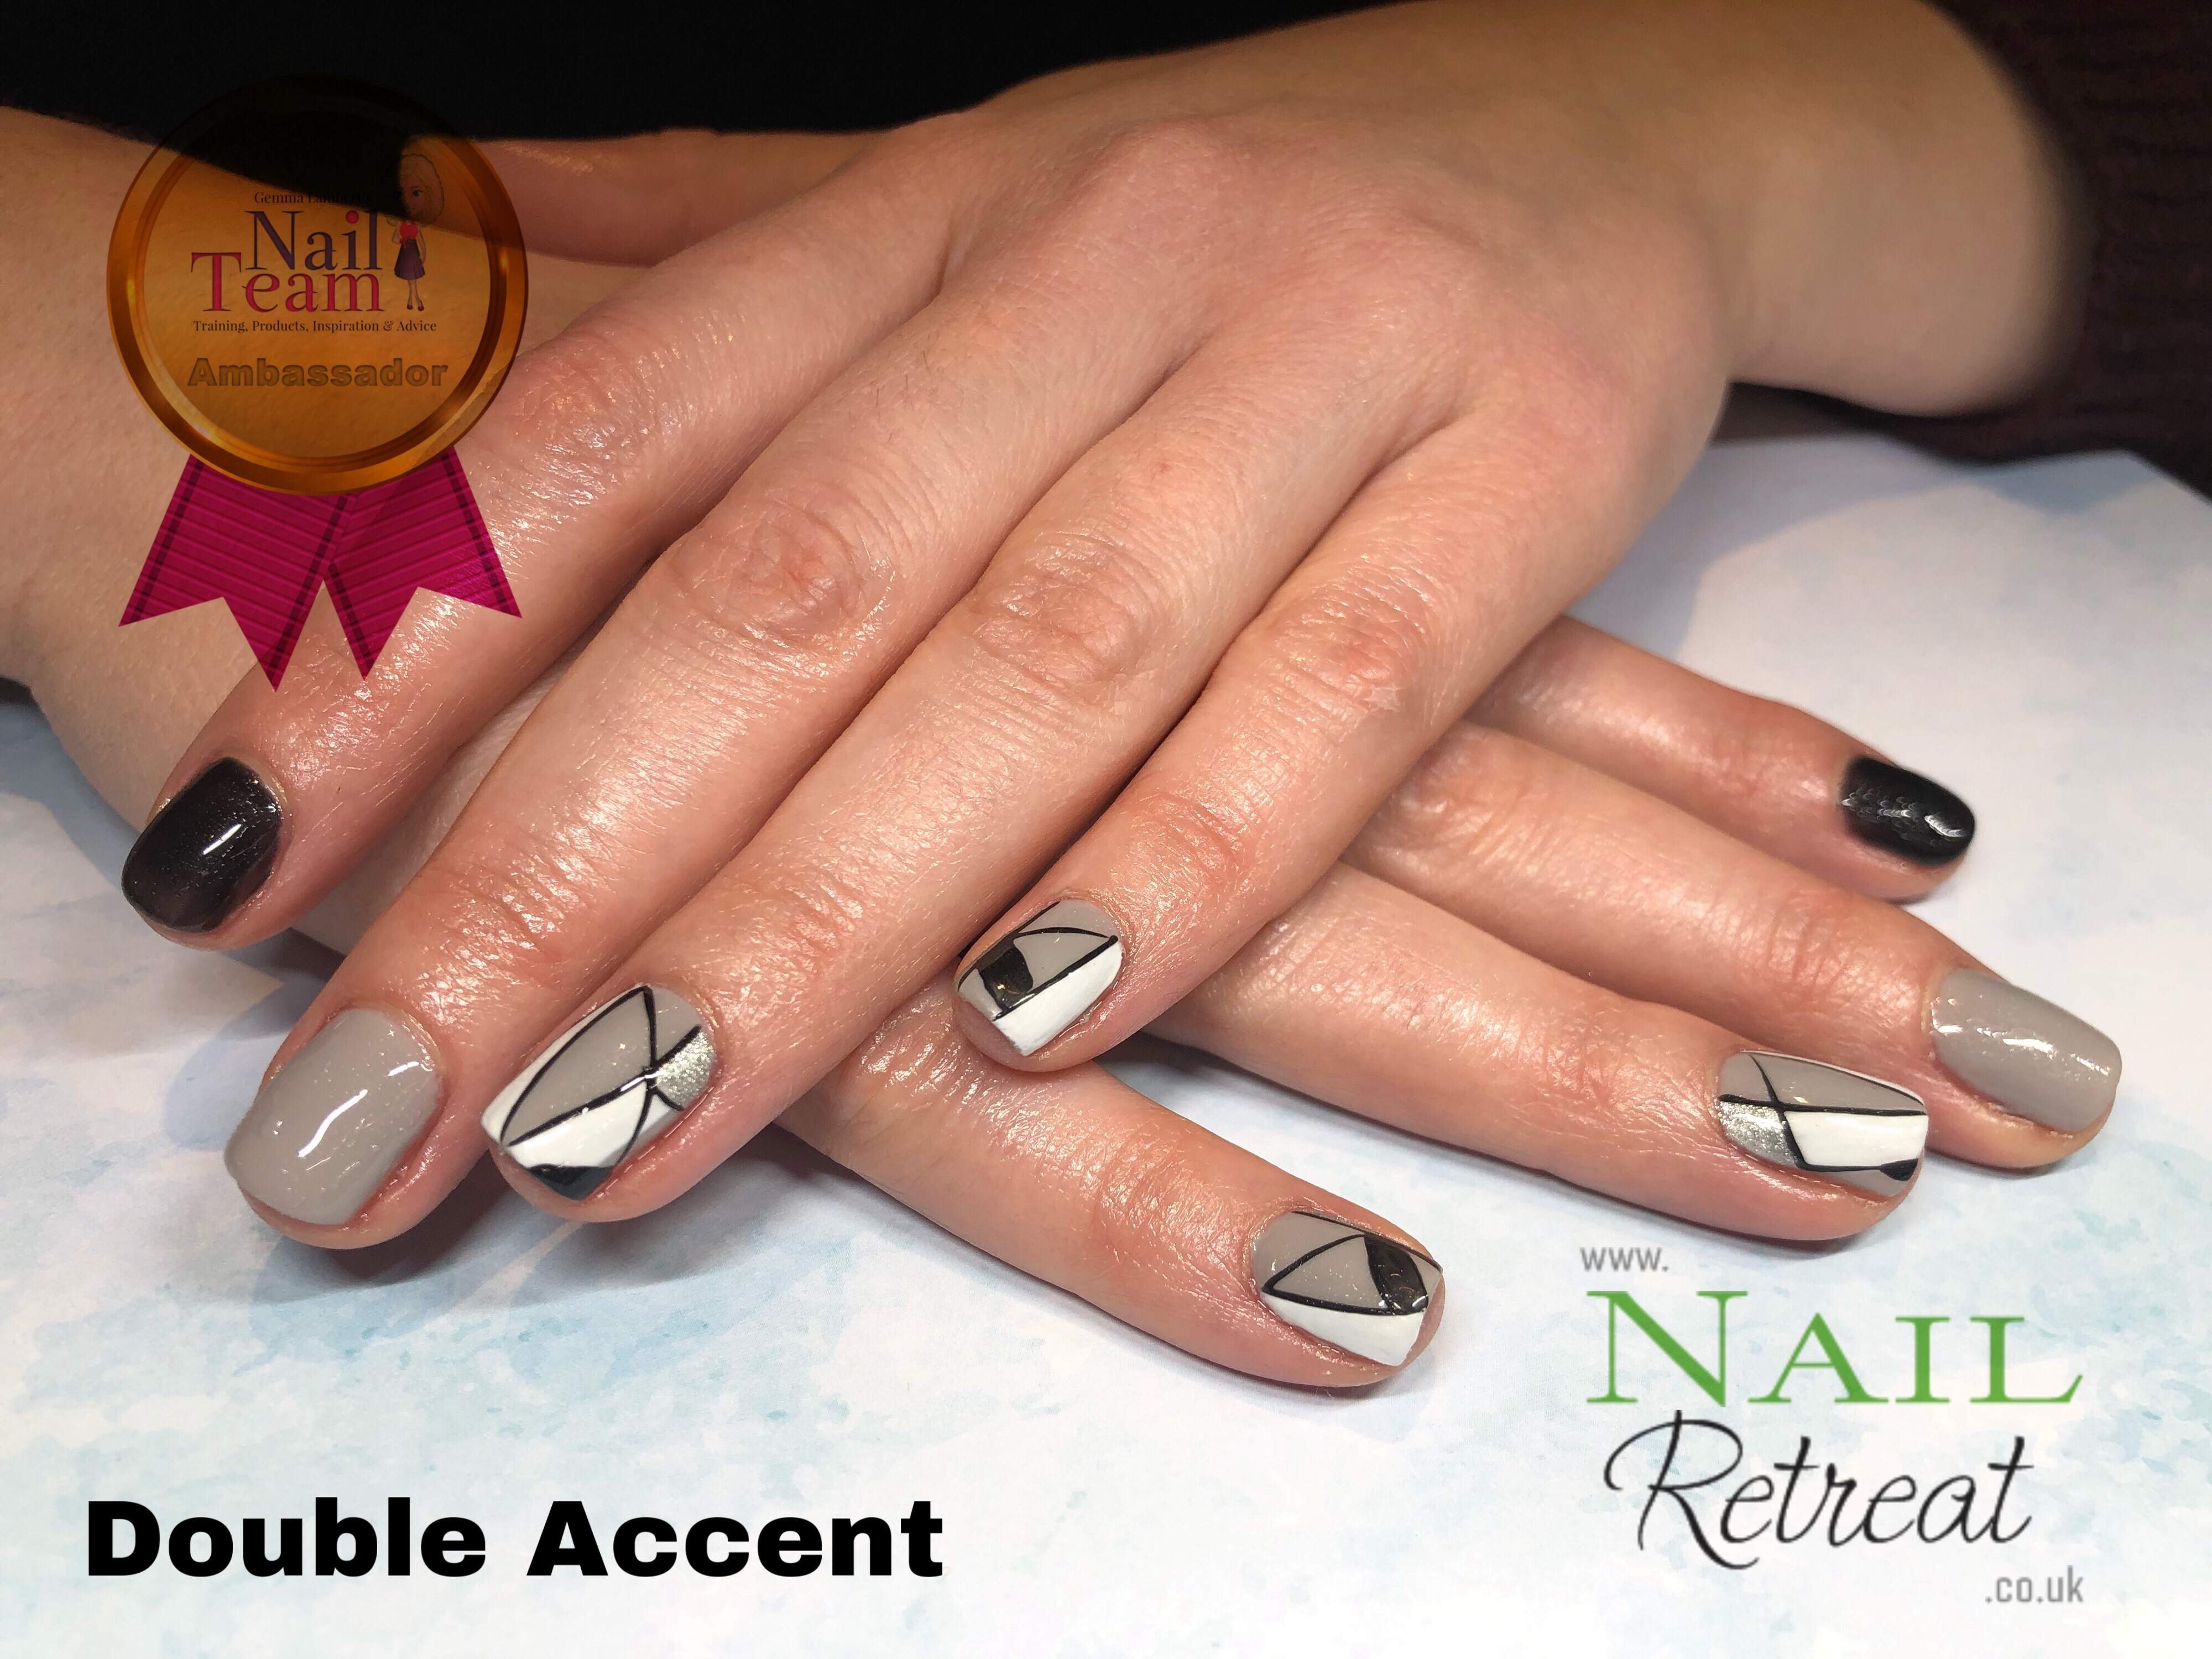 9. The Nail Retreat - wide 2